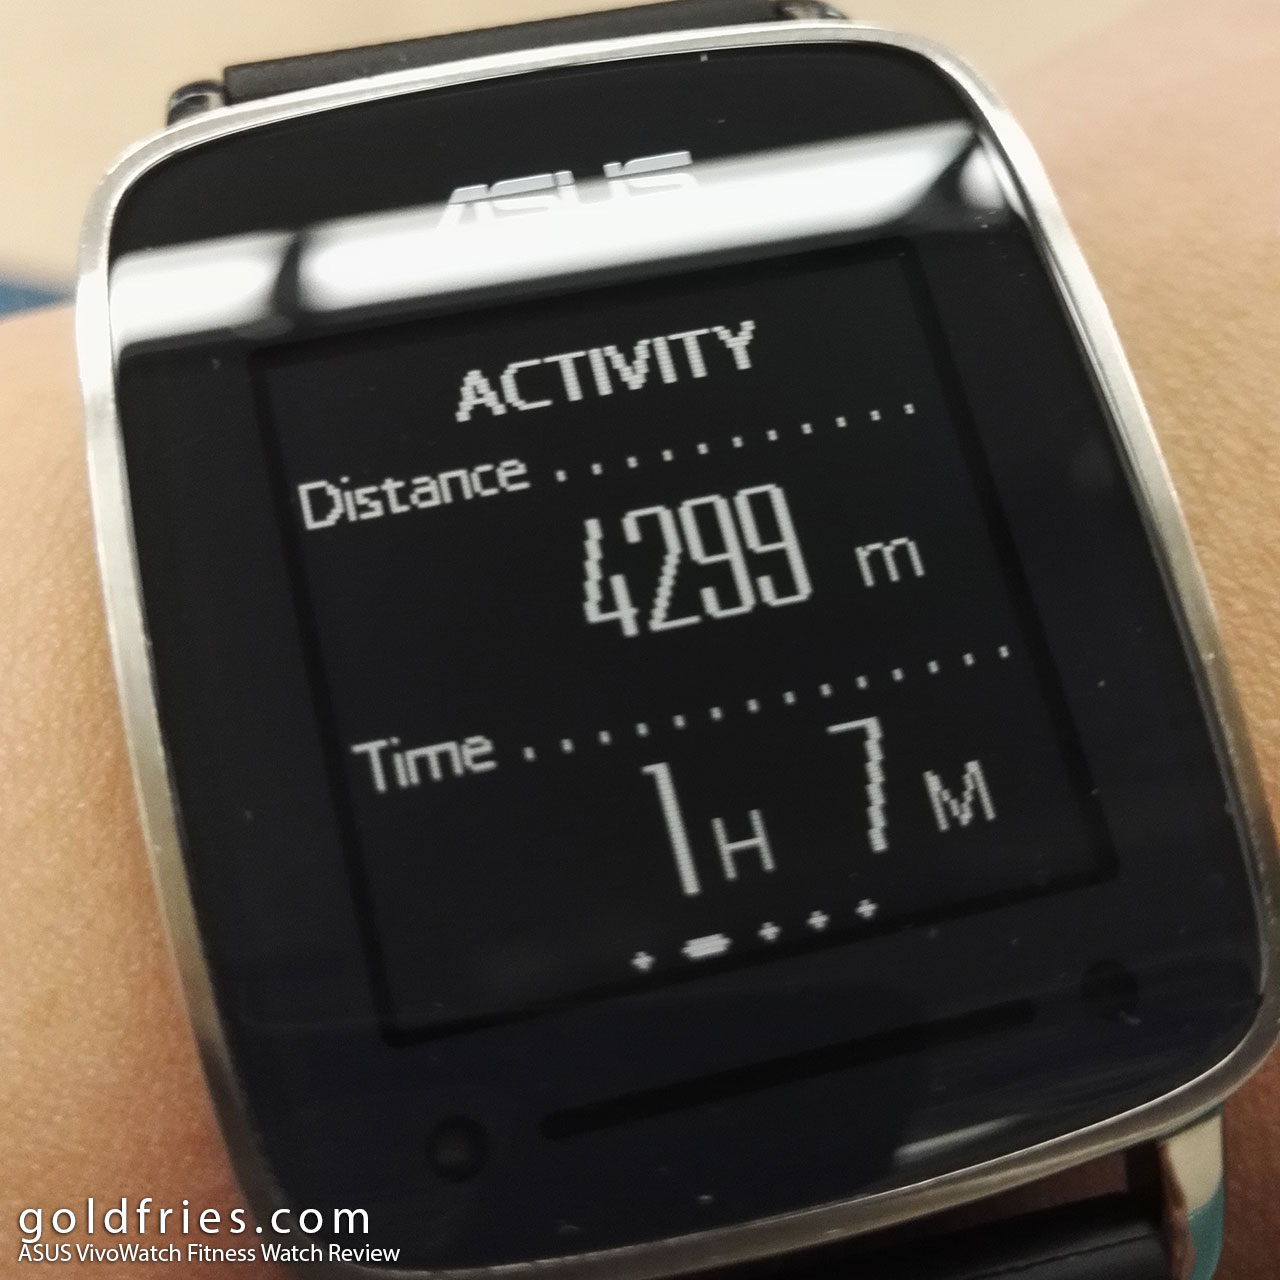 ASUS VivoWatch Fitness Watch Review